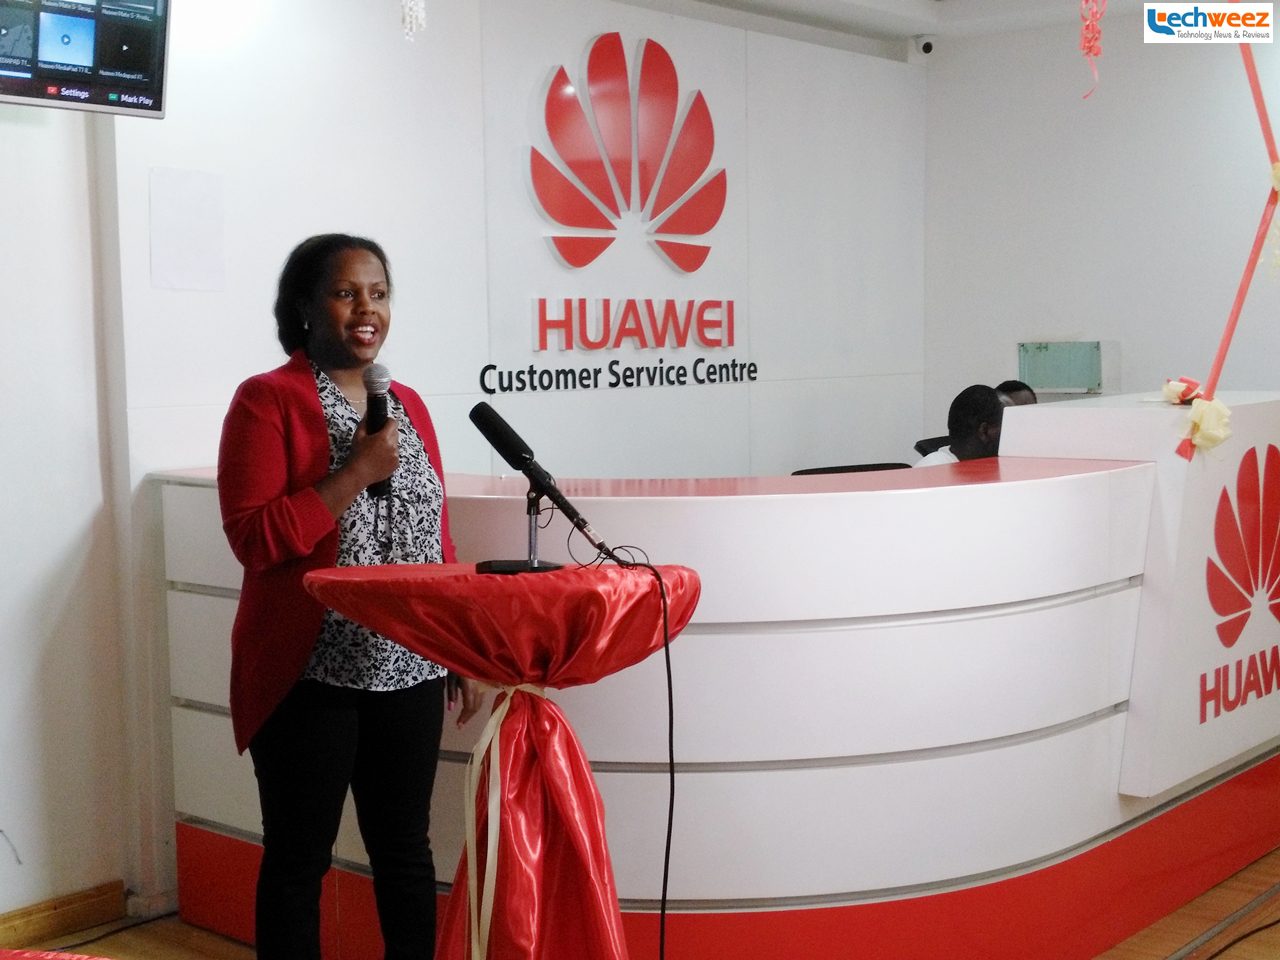 Milicent Ngatia, Huawei Devices Kenya Marketing Manager speaks during the launch early today